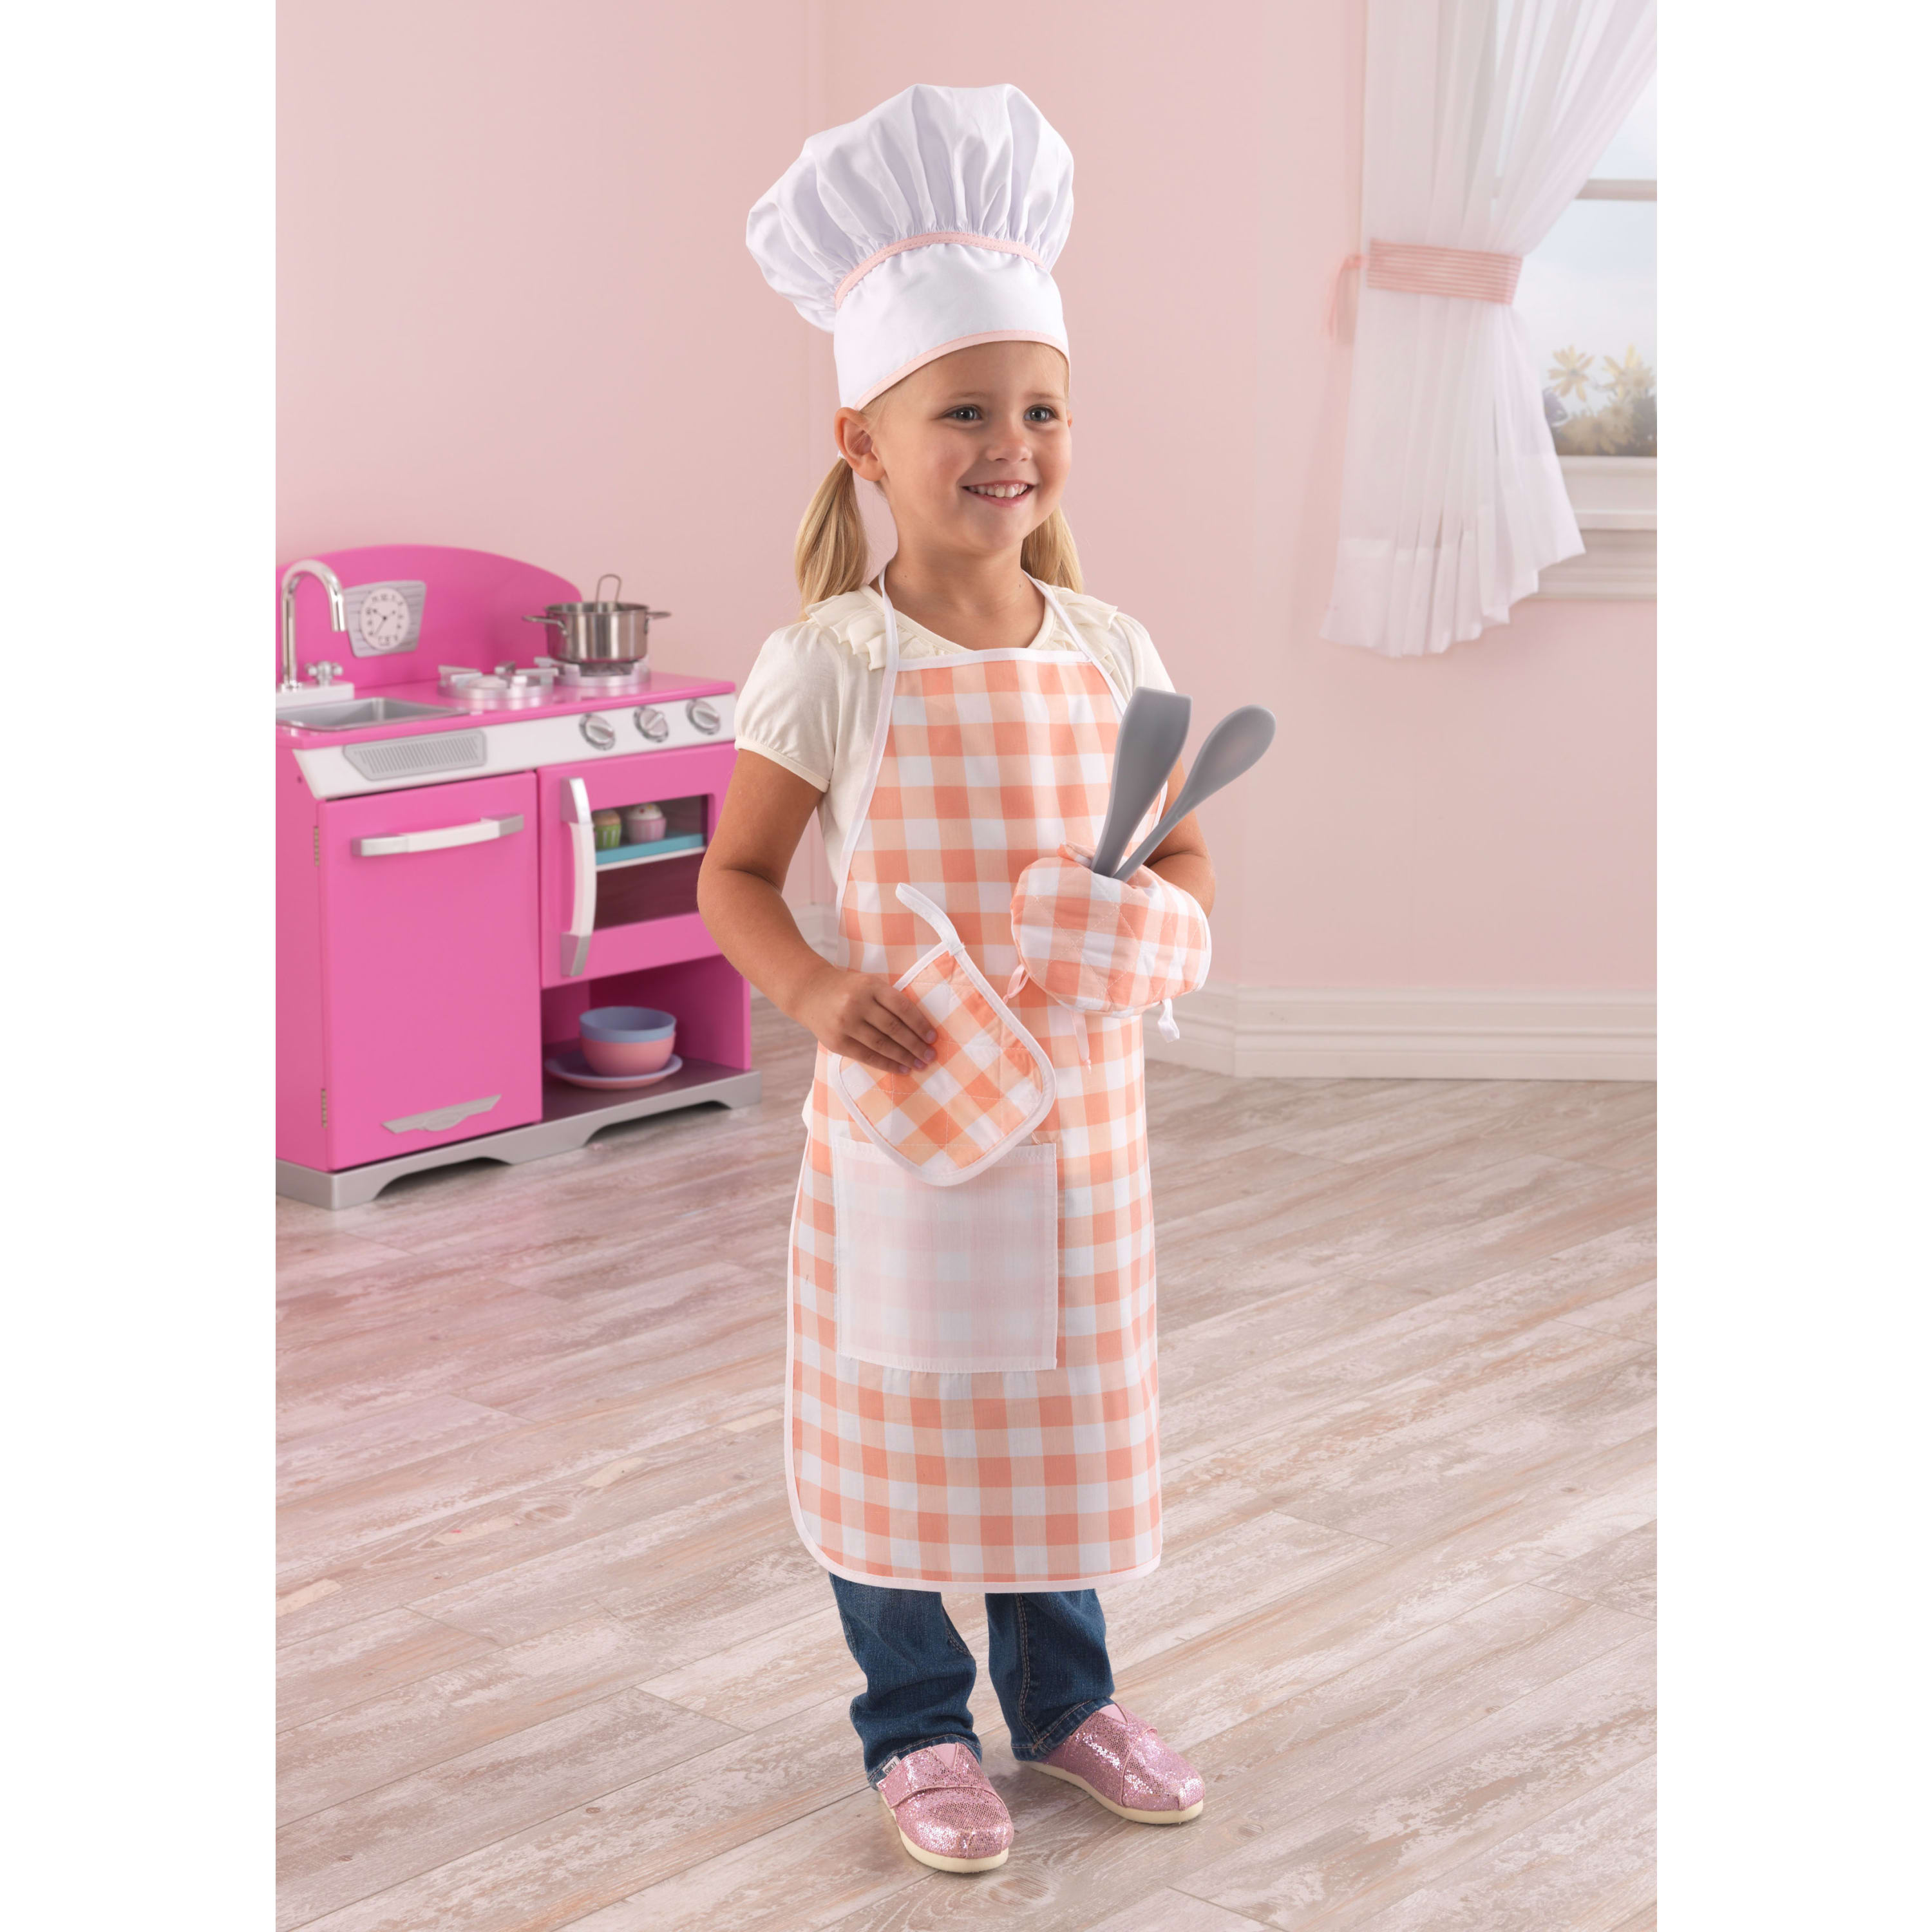 KidKraft Tasty Treats Chef Apron, Hat and Accessory Set for Kids, Pink - image 6 of 8